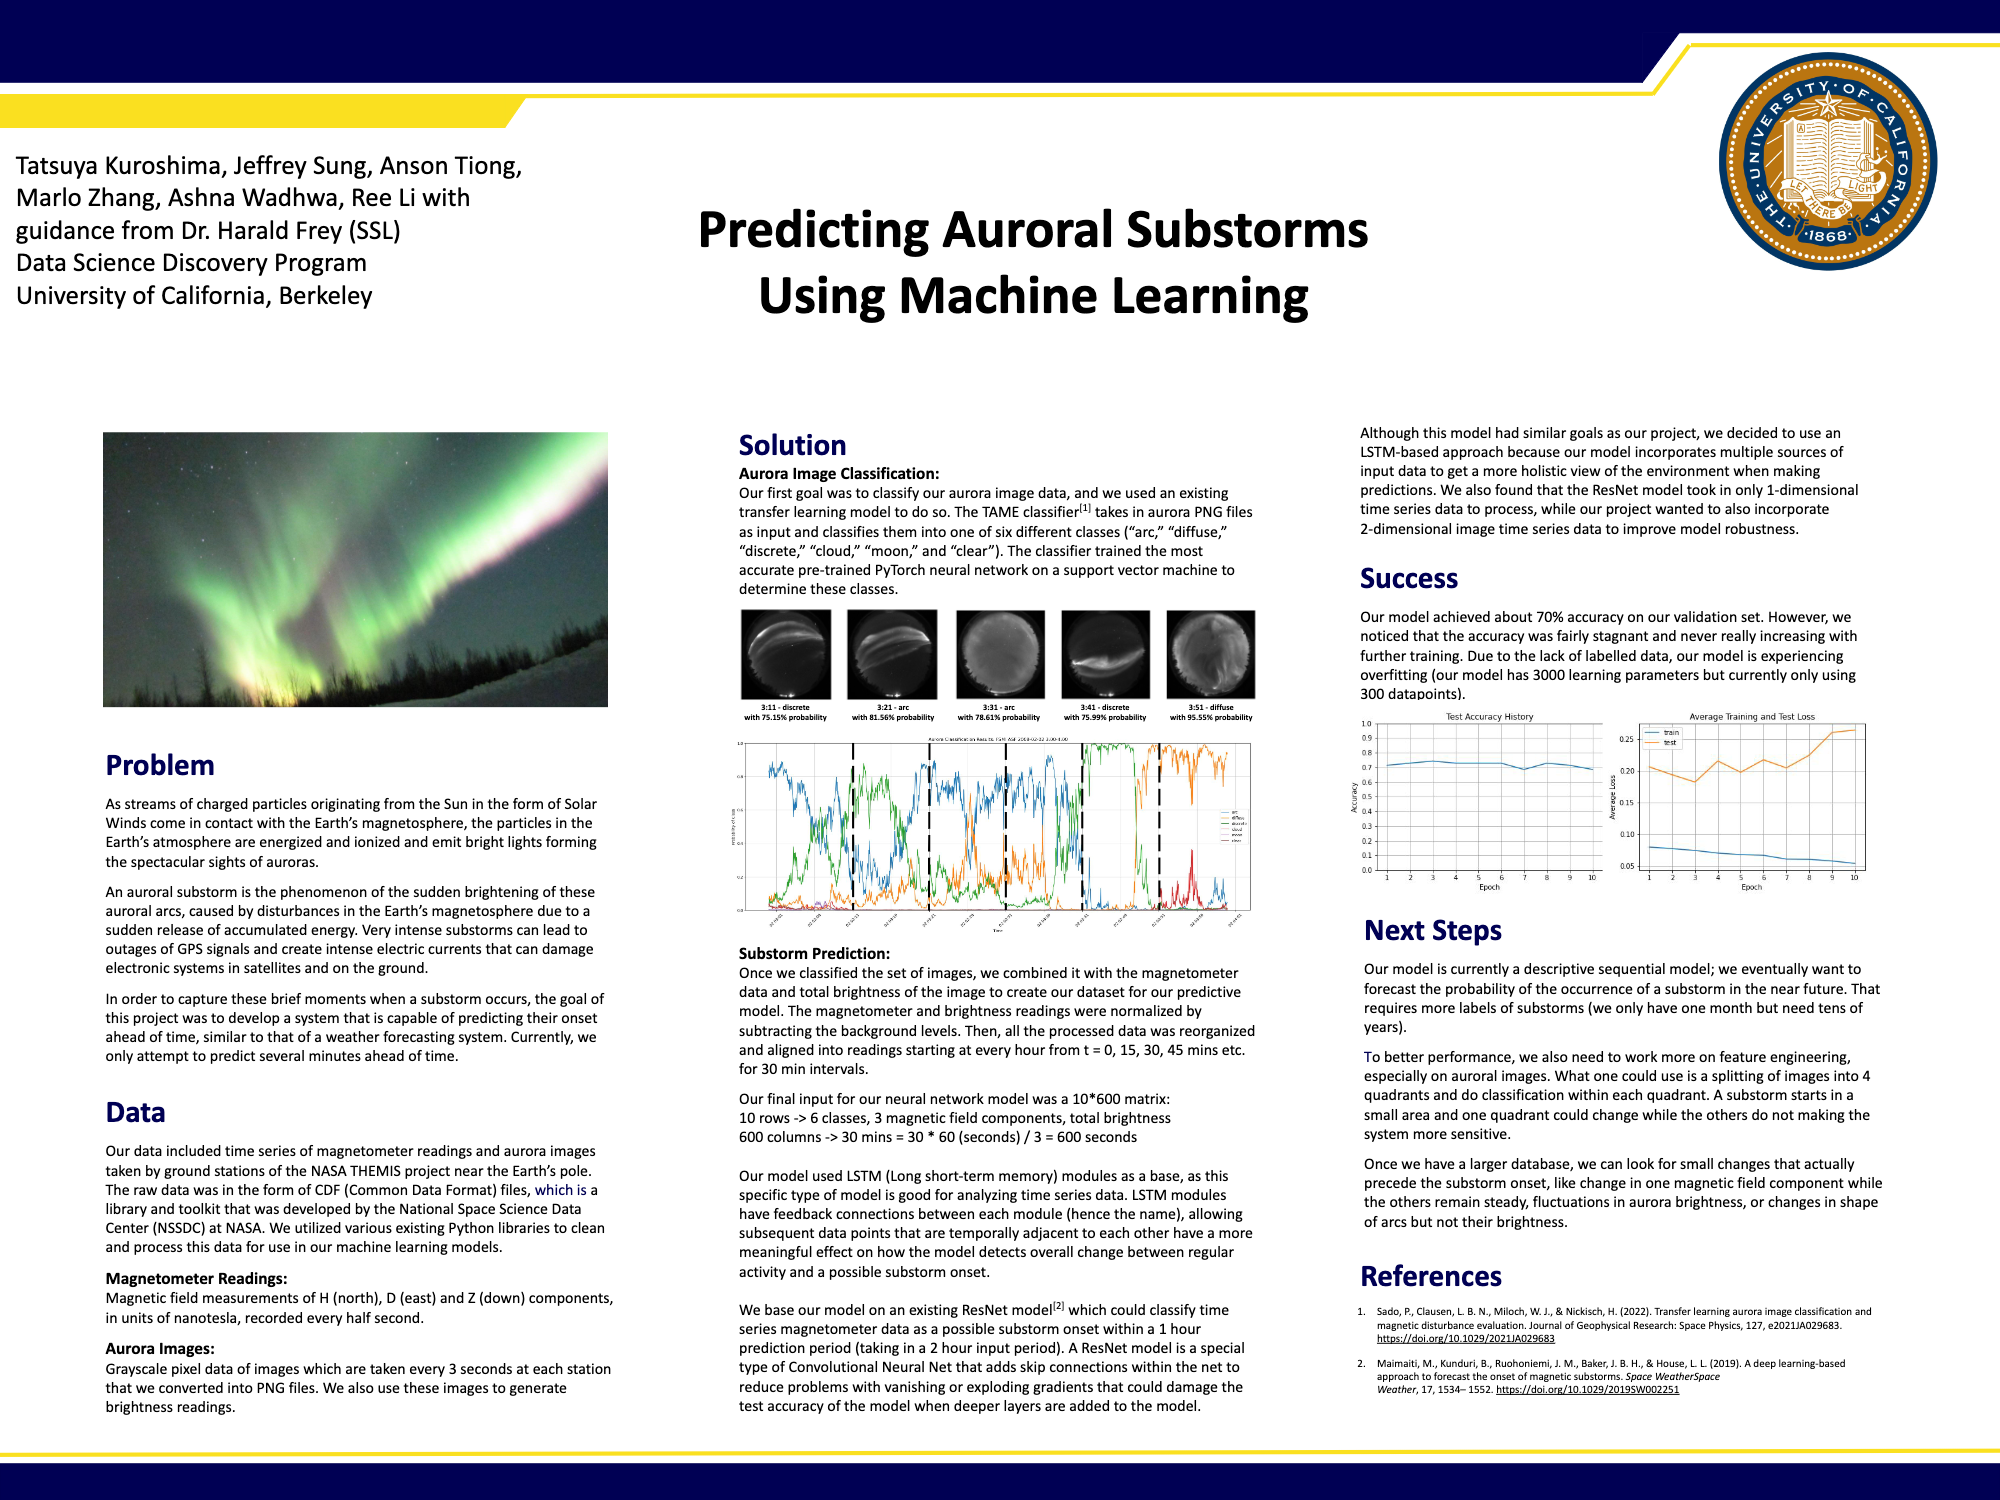 Predicting auroral substorms using machine learning - Fall 2022 Discovery Project